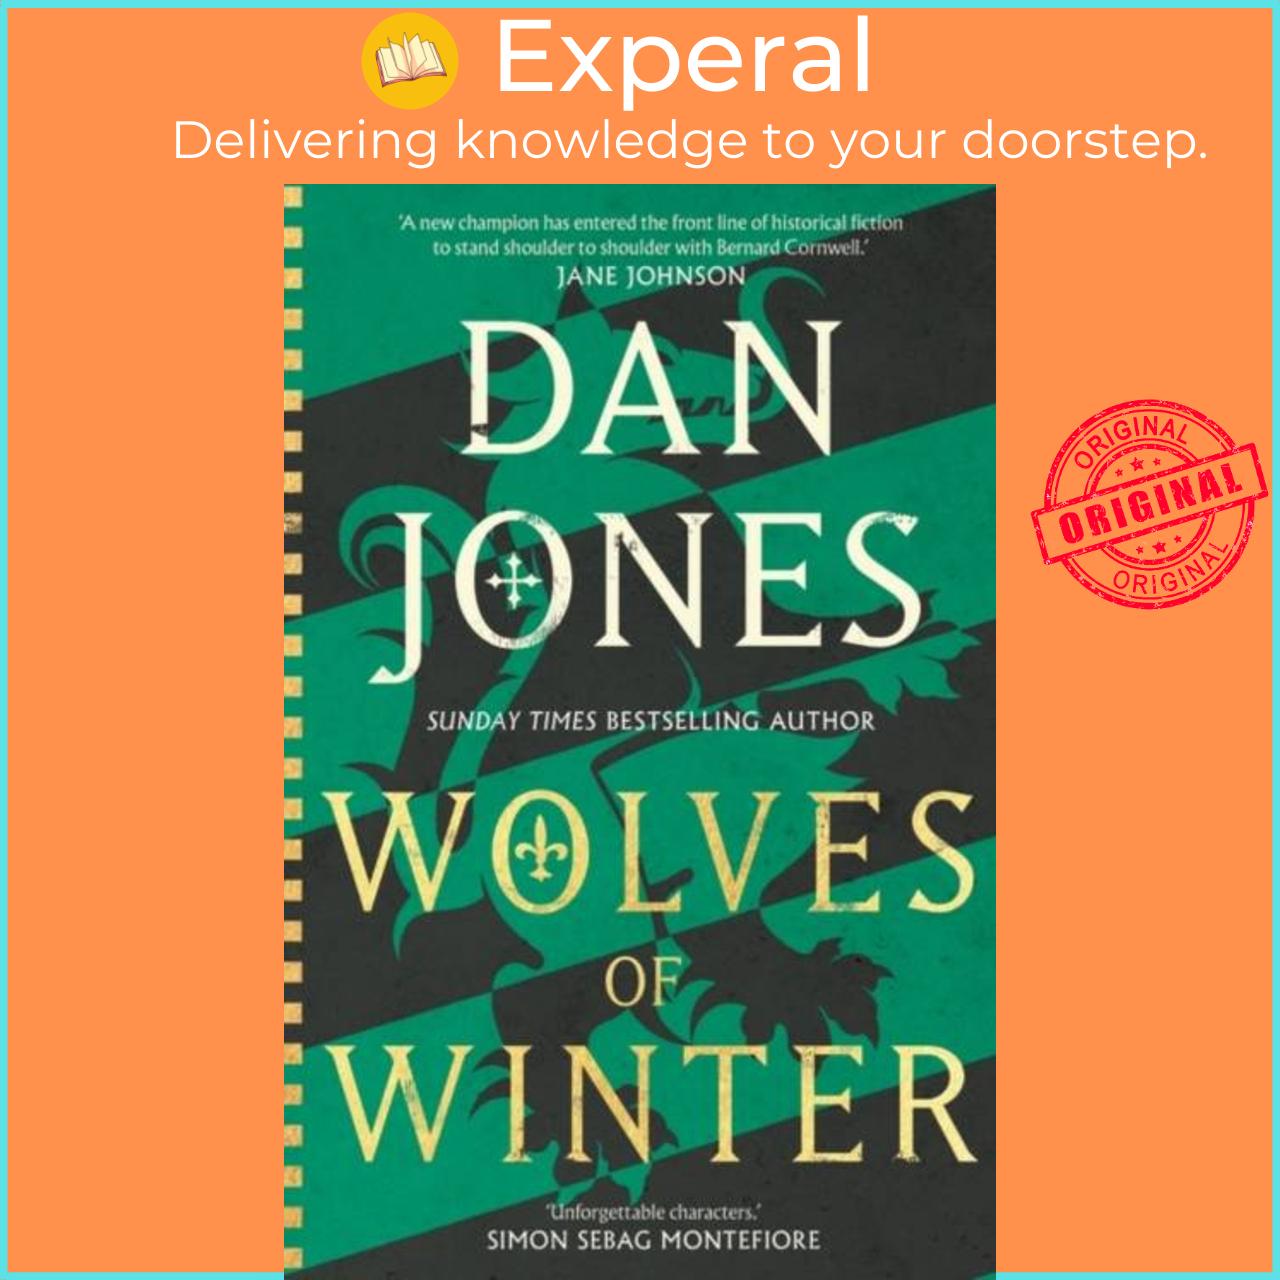 Sách - Wolves of Winter by Dan Jones (UK edition, hardcover)